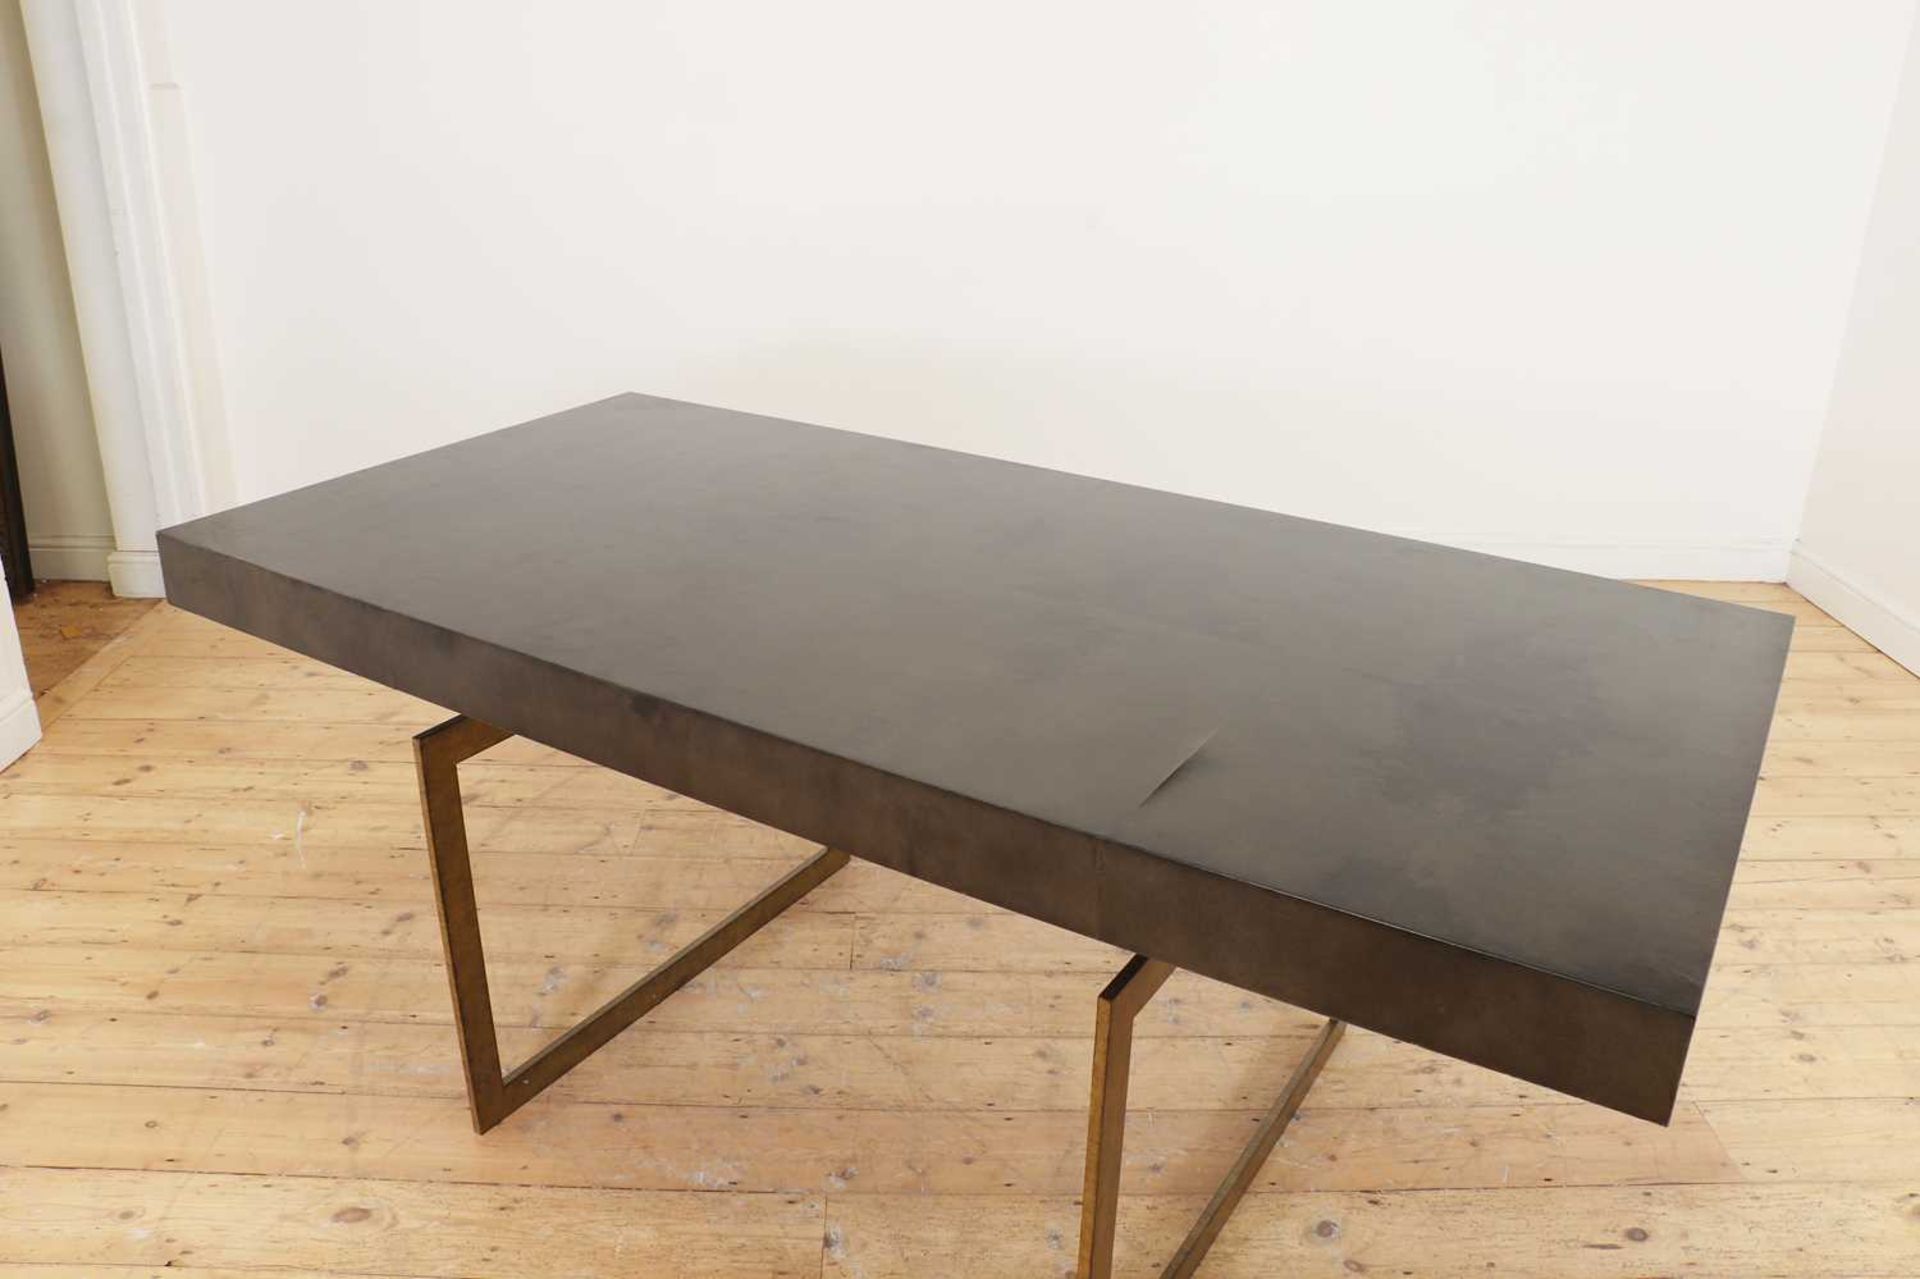 A 'Cortes' desk by Julian Chichester, - Image 7 of 16